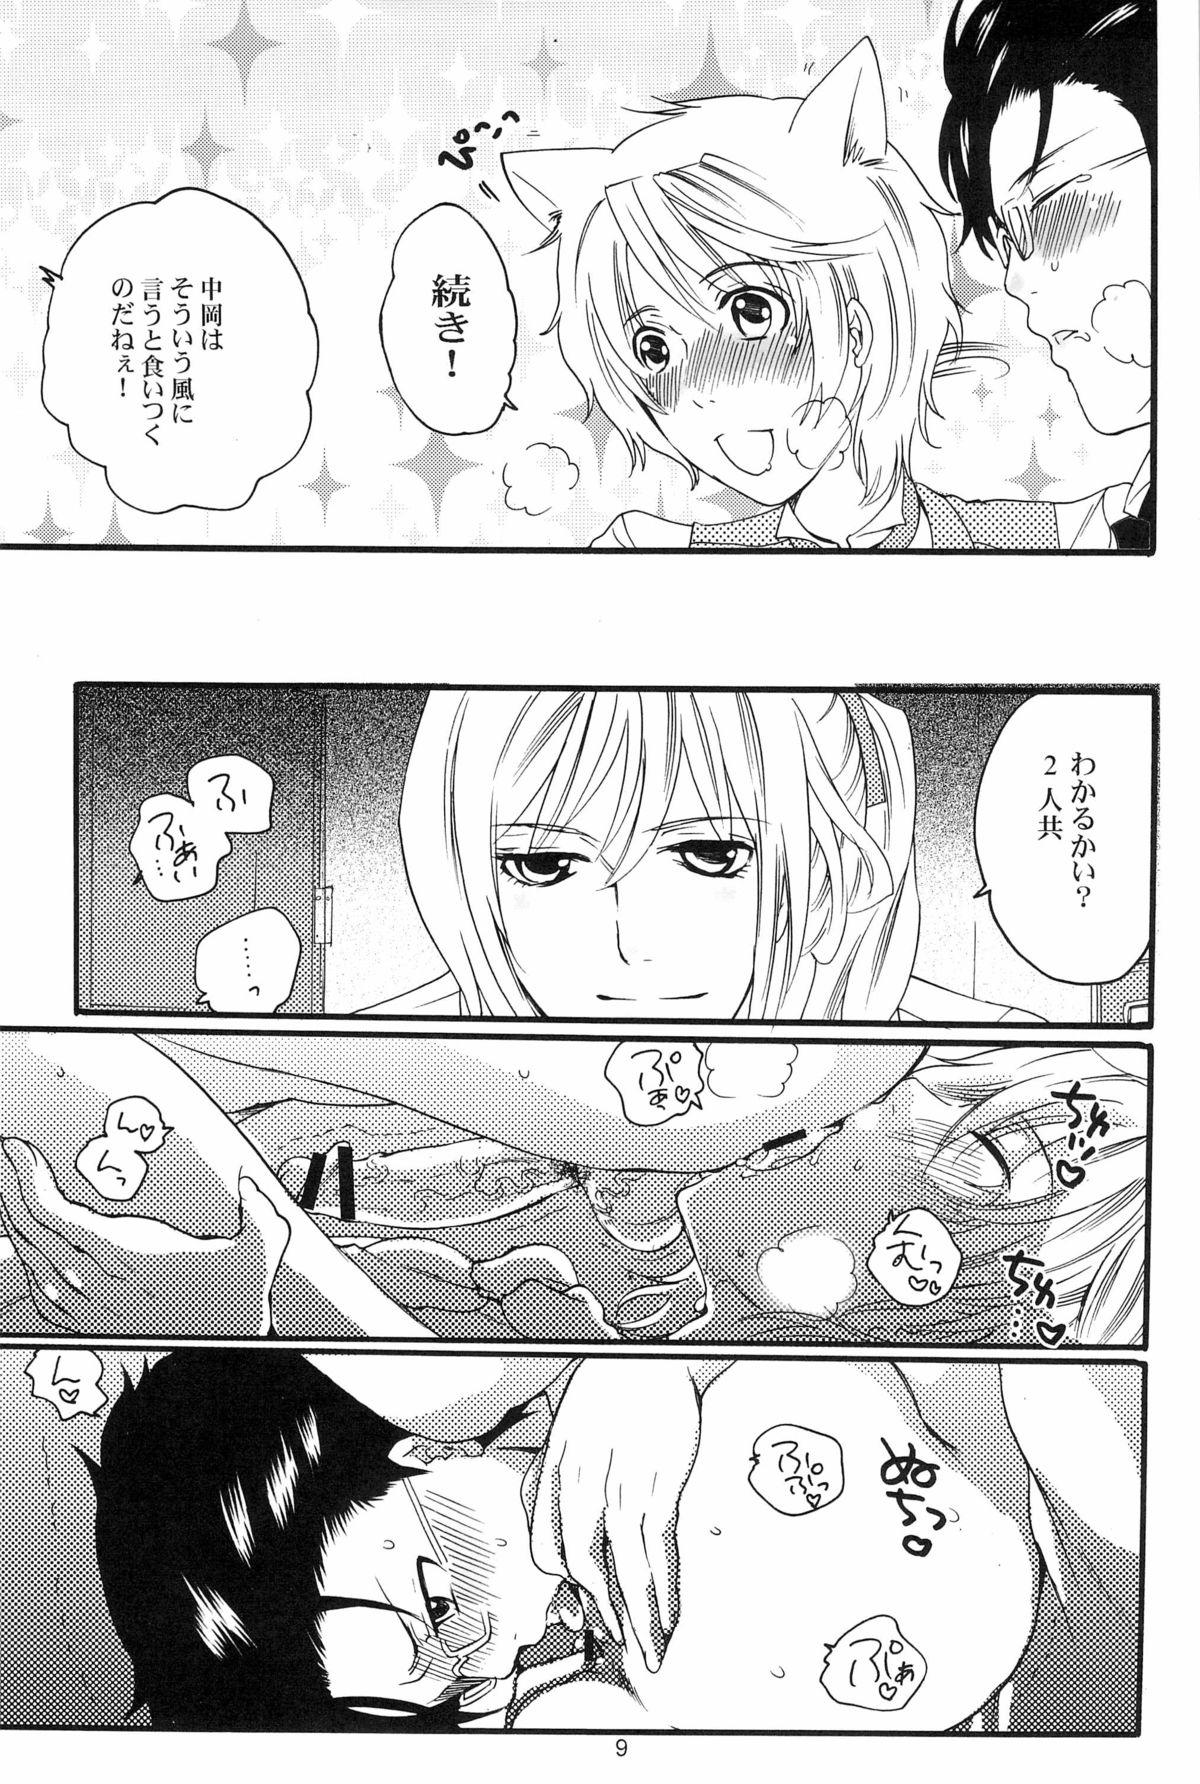 Whores DT Kouryakuhon - Starry sky Cocksucking - Page 9